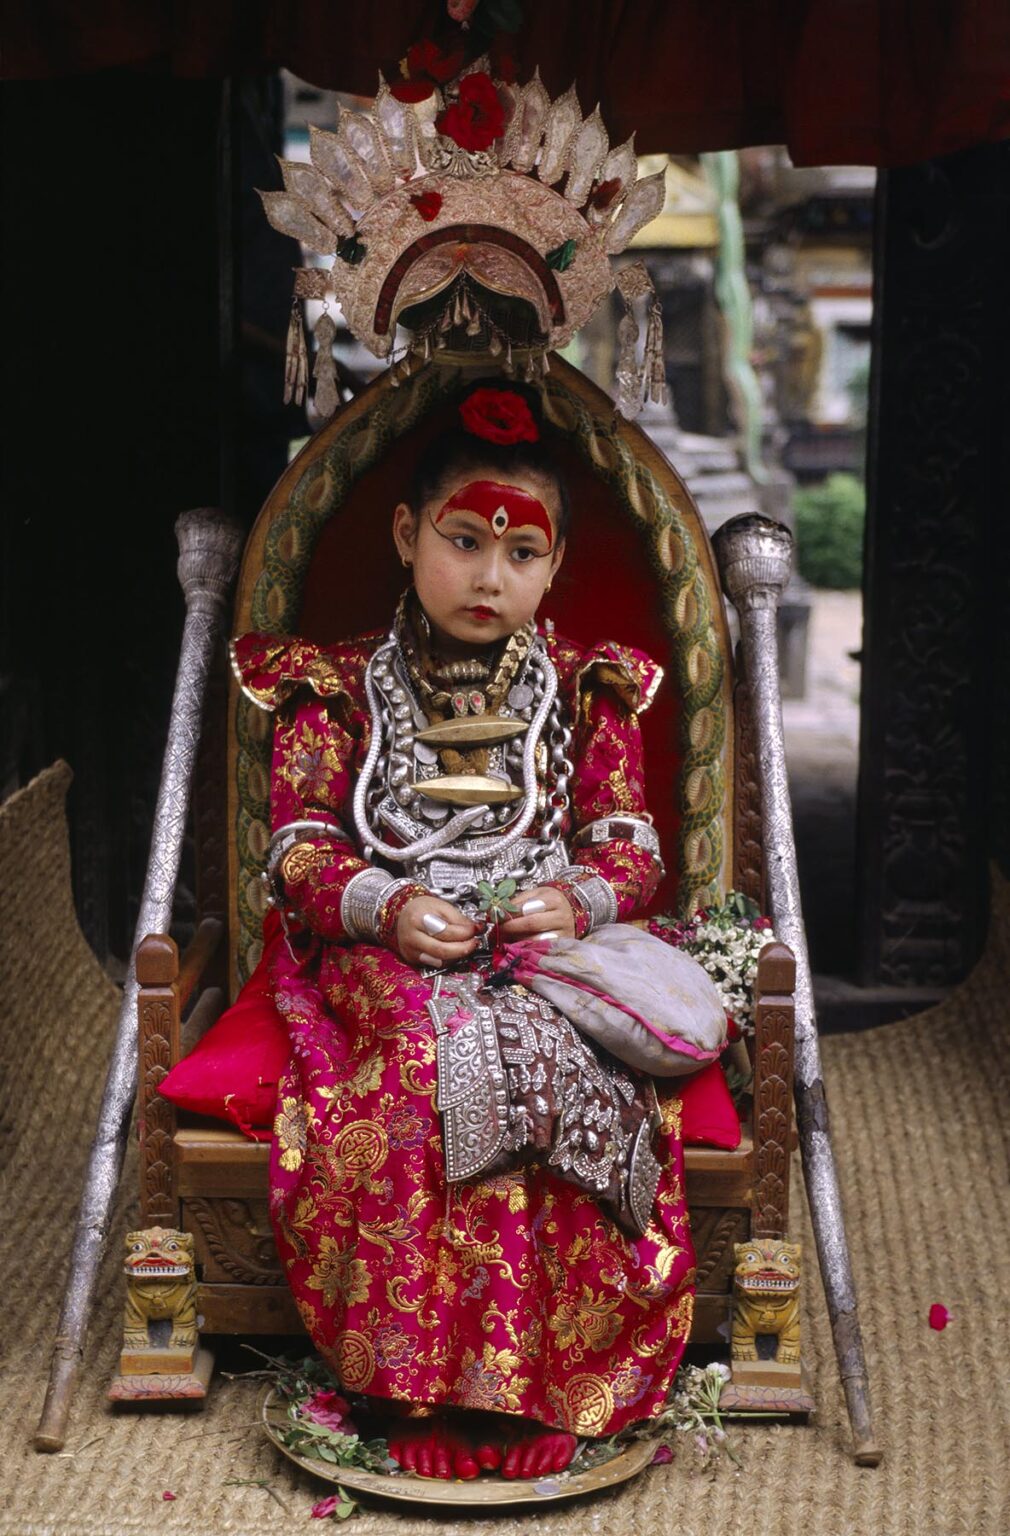 The LIVING GODDESS in her full regalia sits on her thrown during the Rato Machendranath Festival - PATTAN, NEPAL